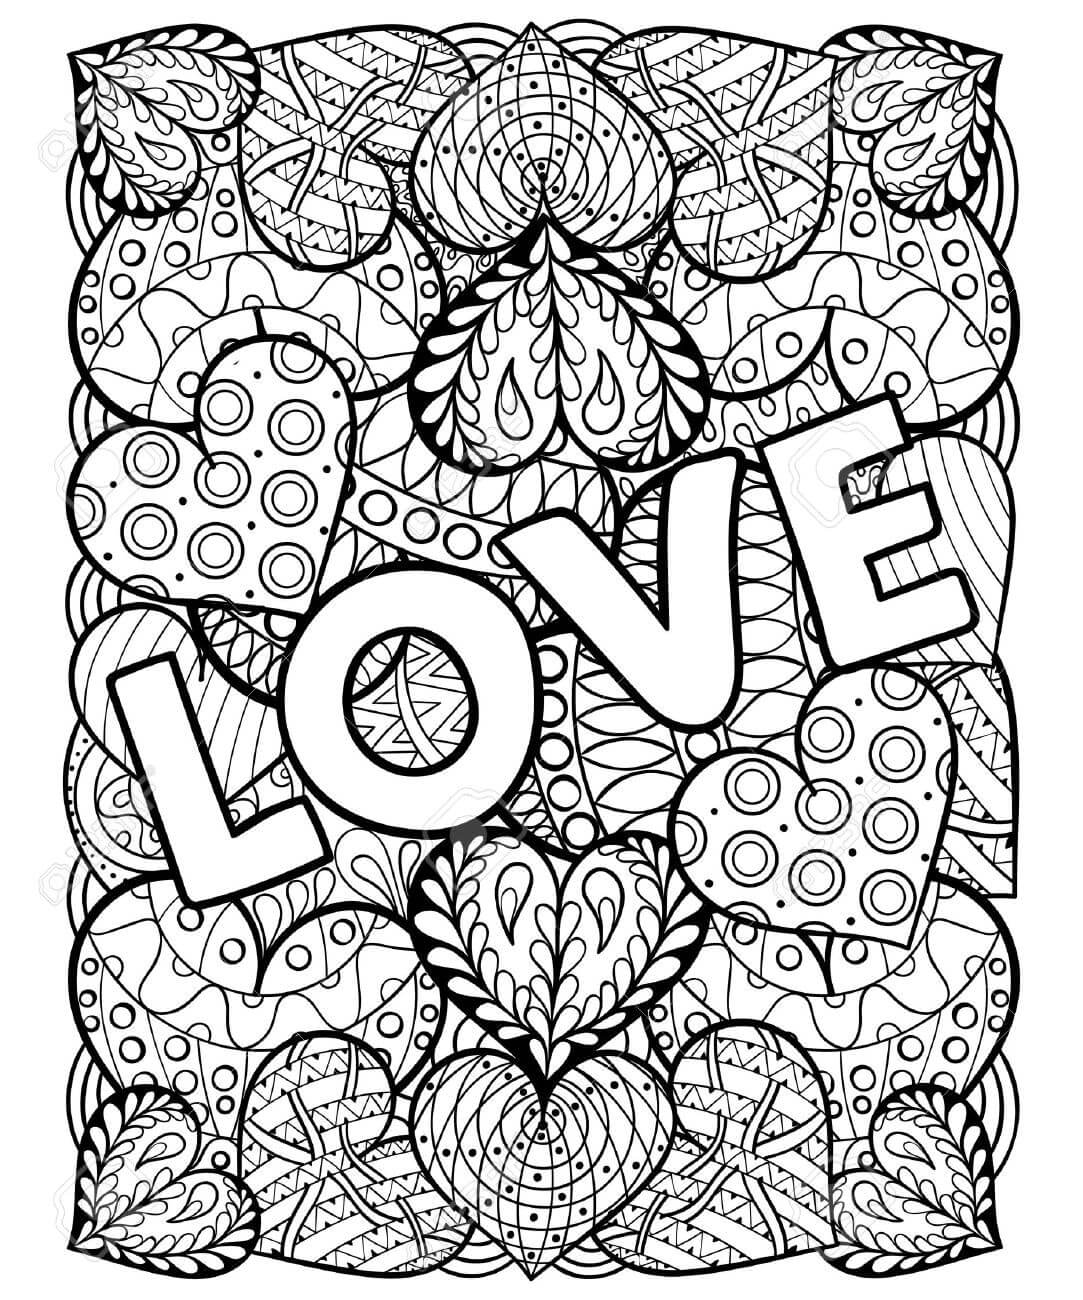 Detailed Love and Hearts Coloring Page for Adults